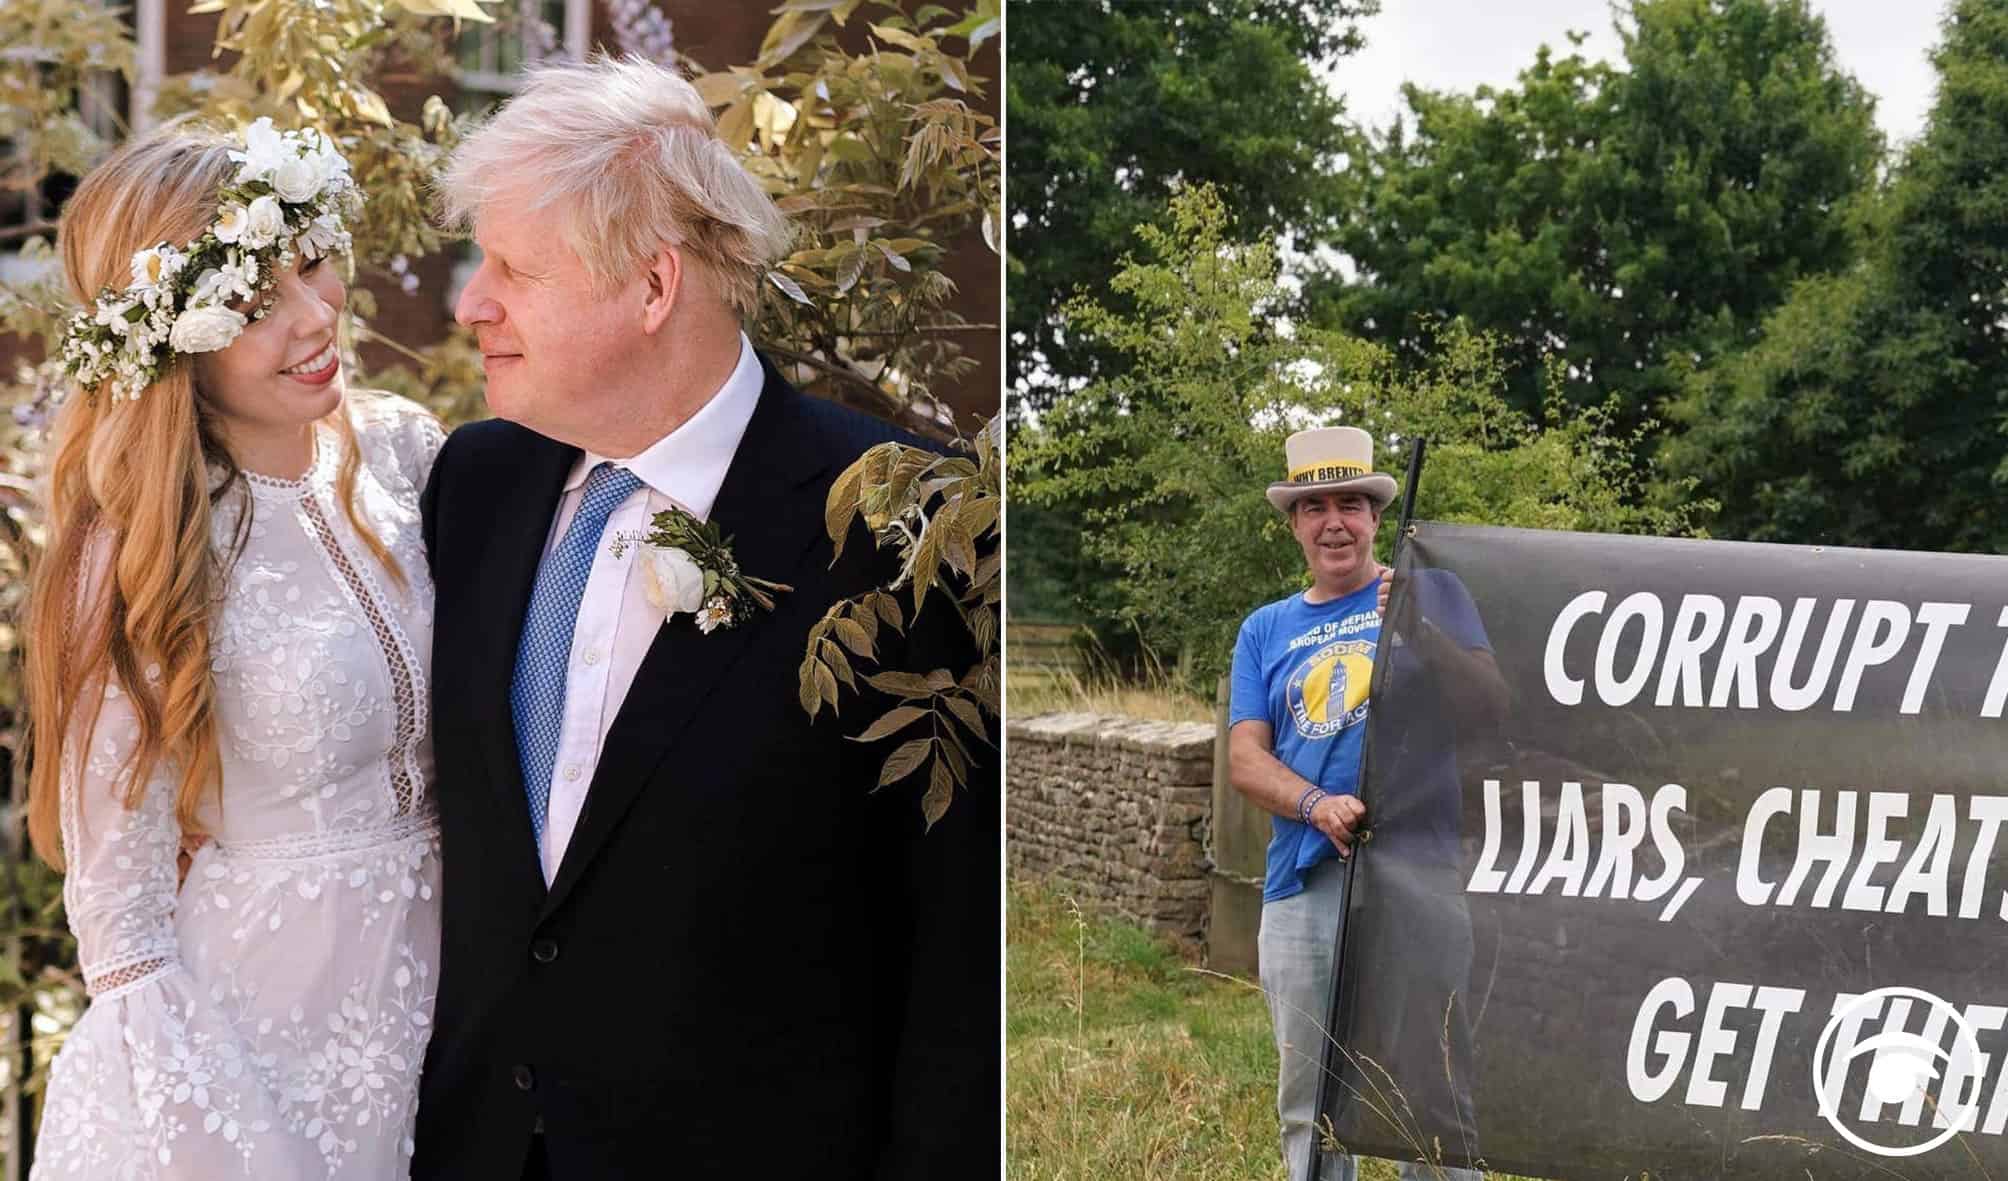 Watch: Steve Bray had quite a day as he ‘attended’ Boris Johnson’s wedding and fellow protestor ‘arrested’